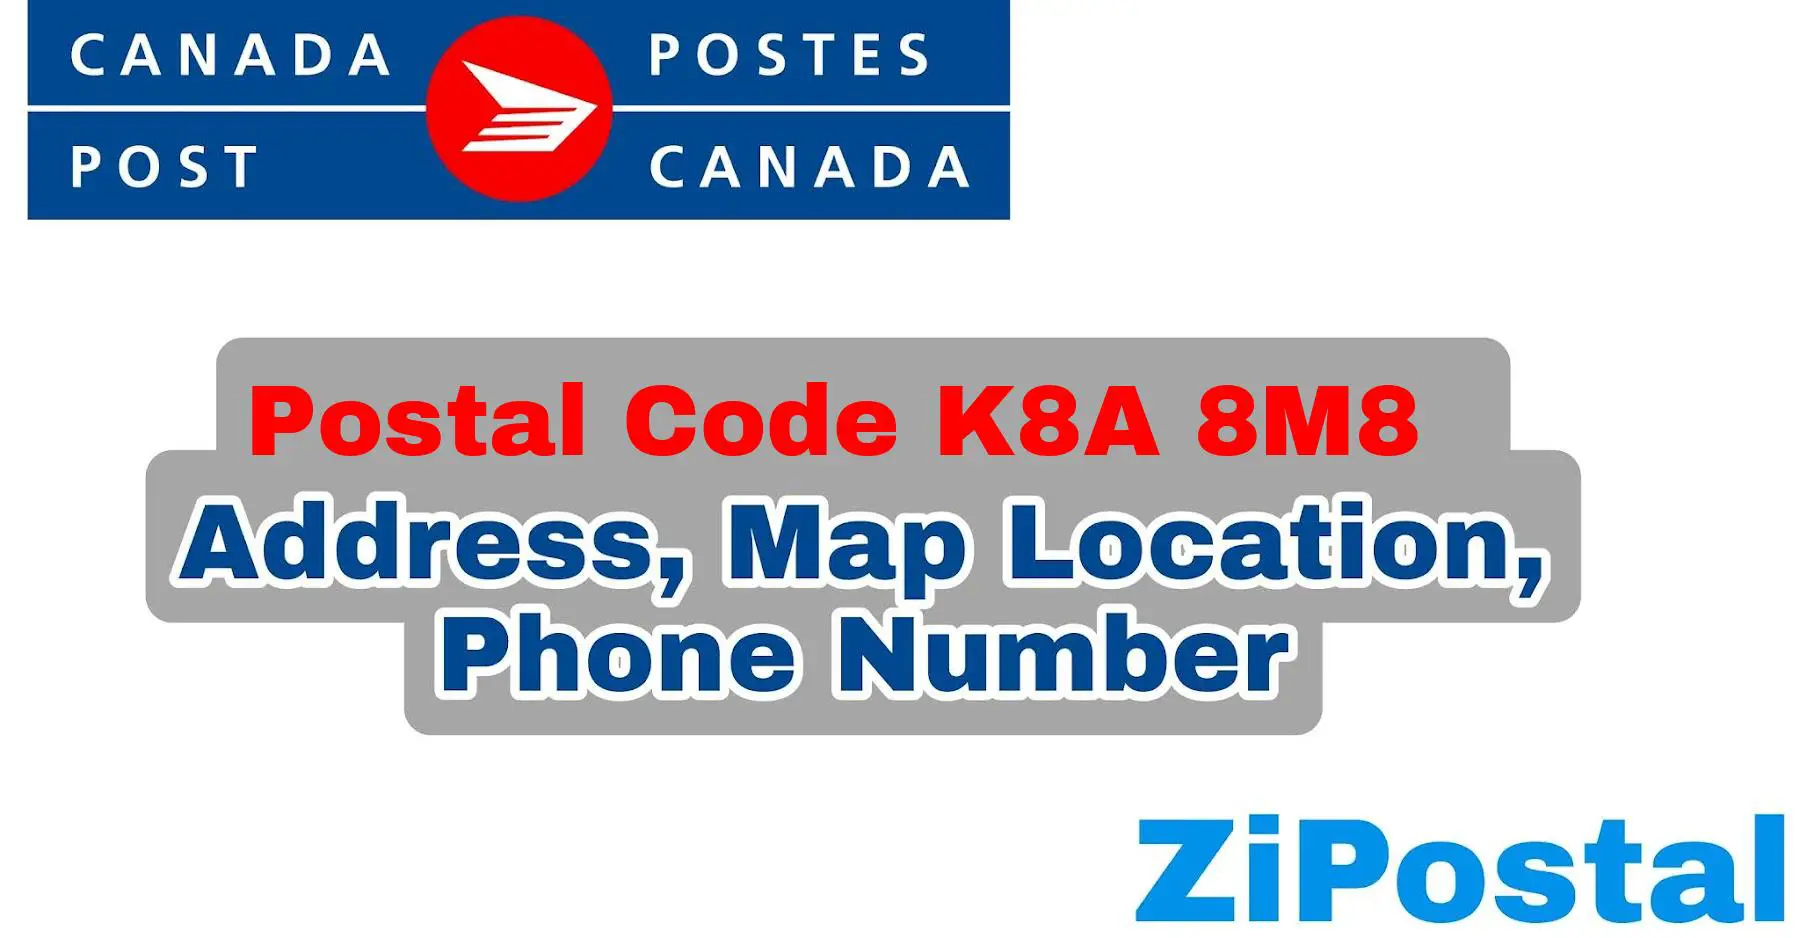 Postal Code K8A 8M8 Address Map Location and Phone Number